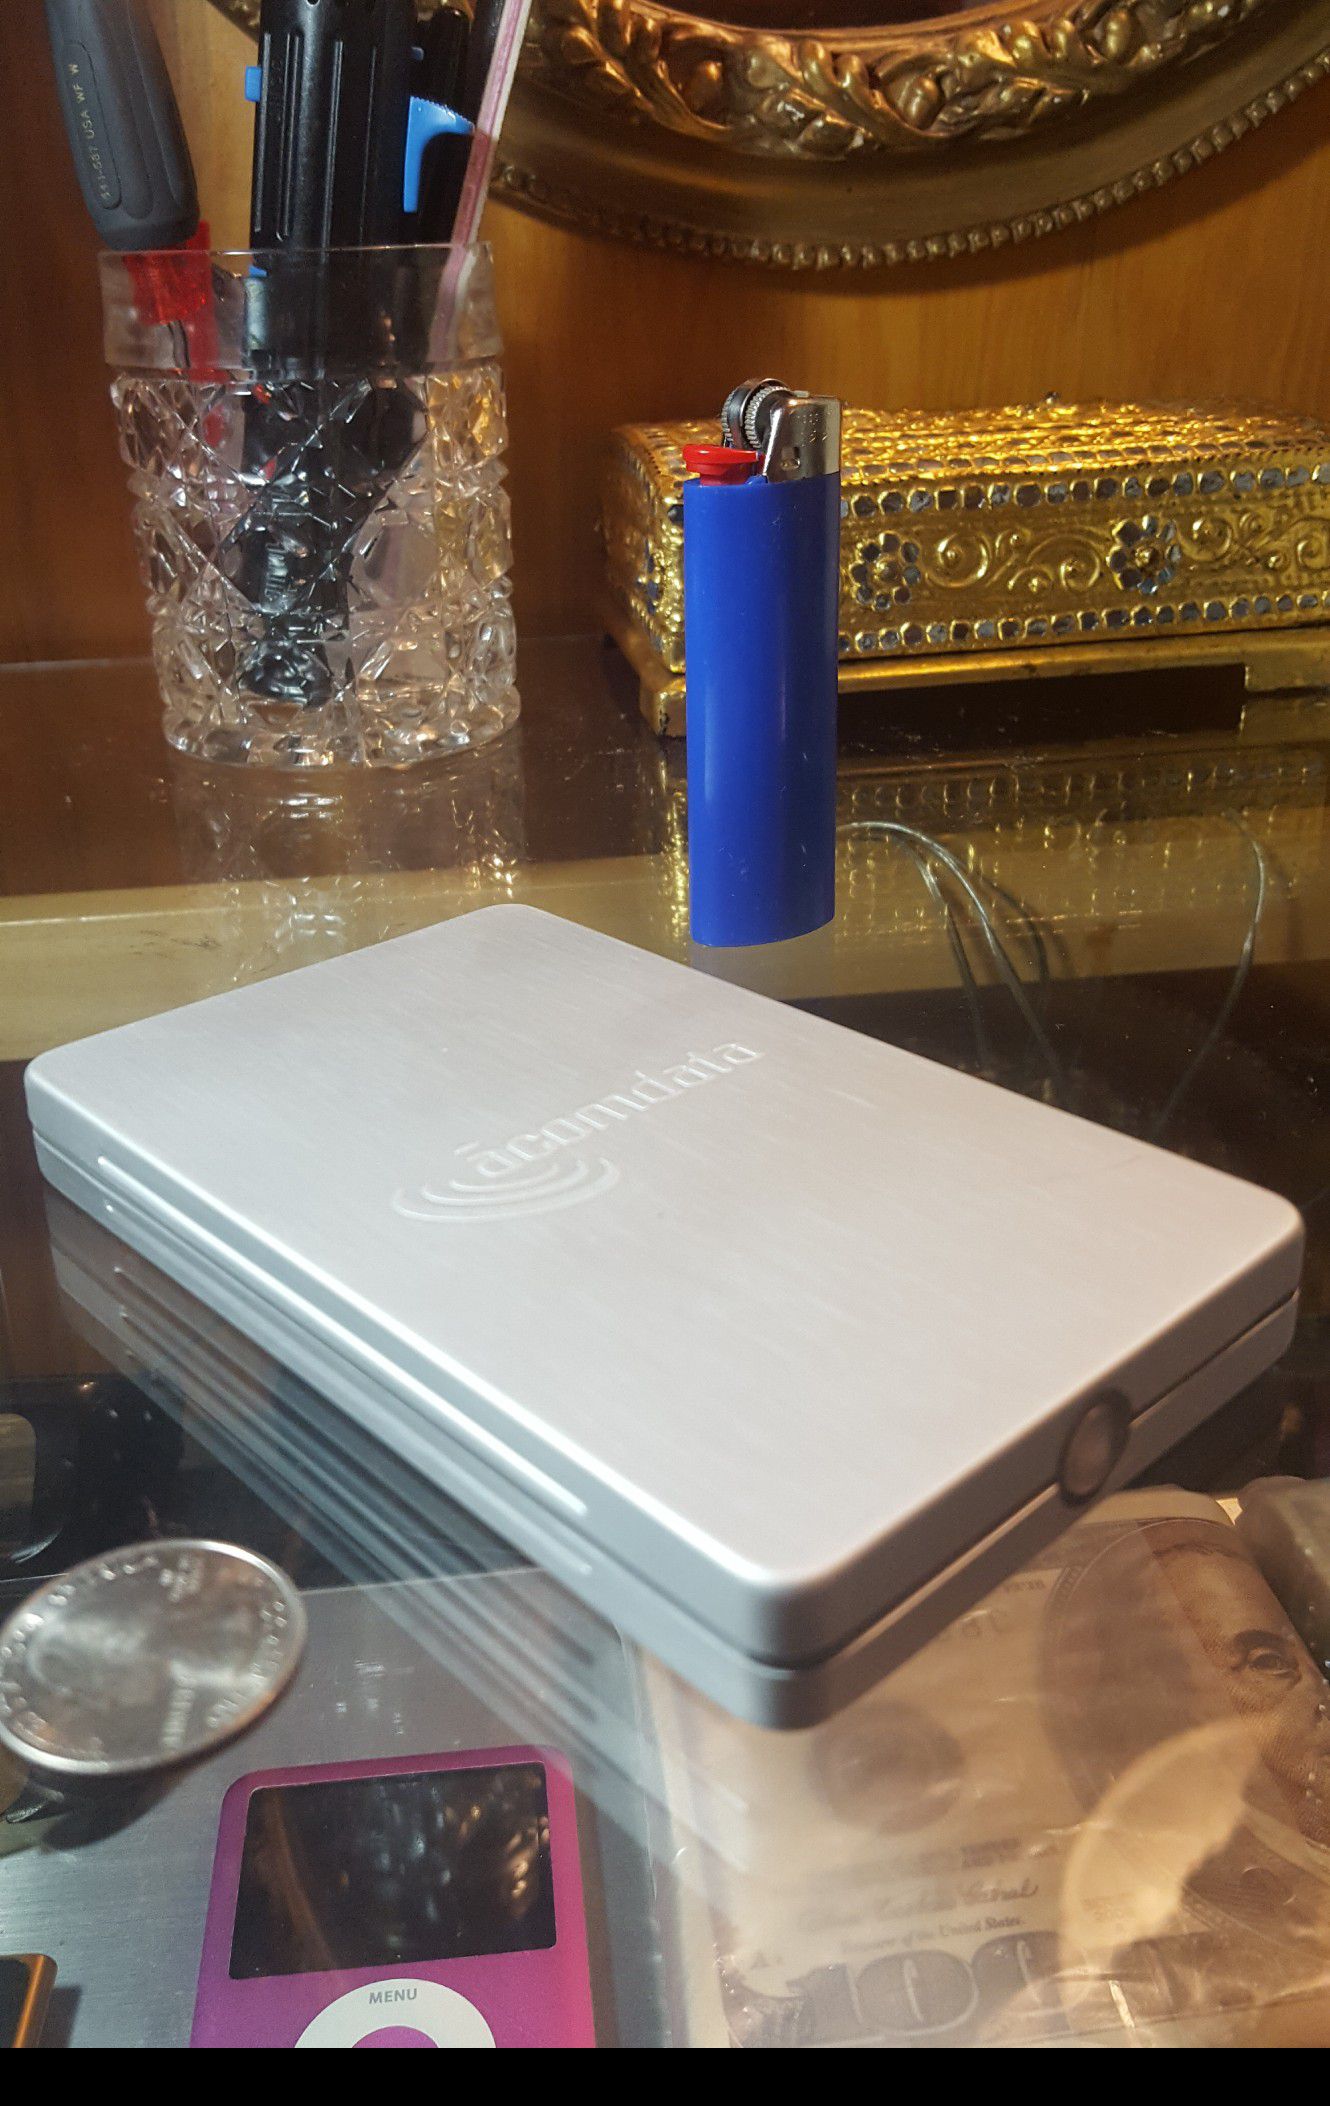 SOLD OUT -Portable Hard Drive - Storing Pics, Home-made Movies, Music, Files up to 80GB [Silver]